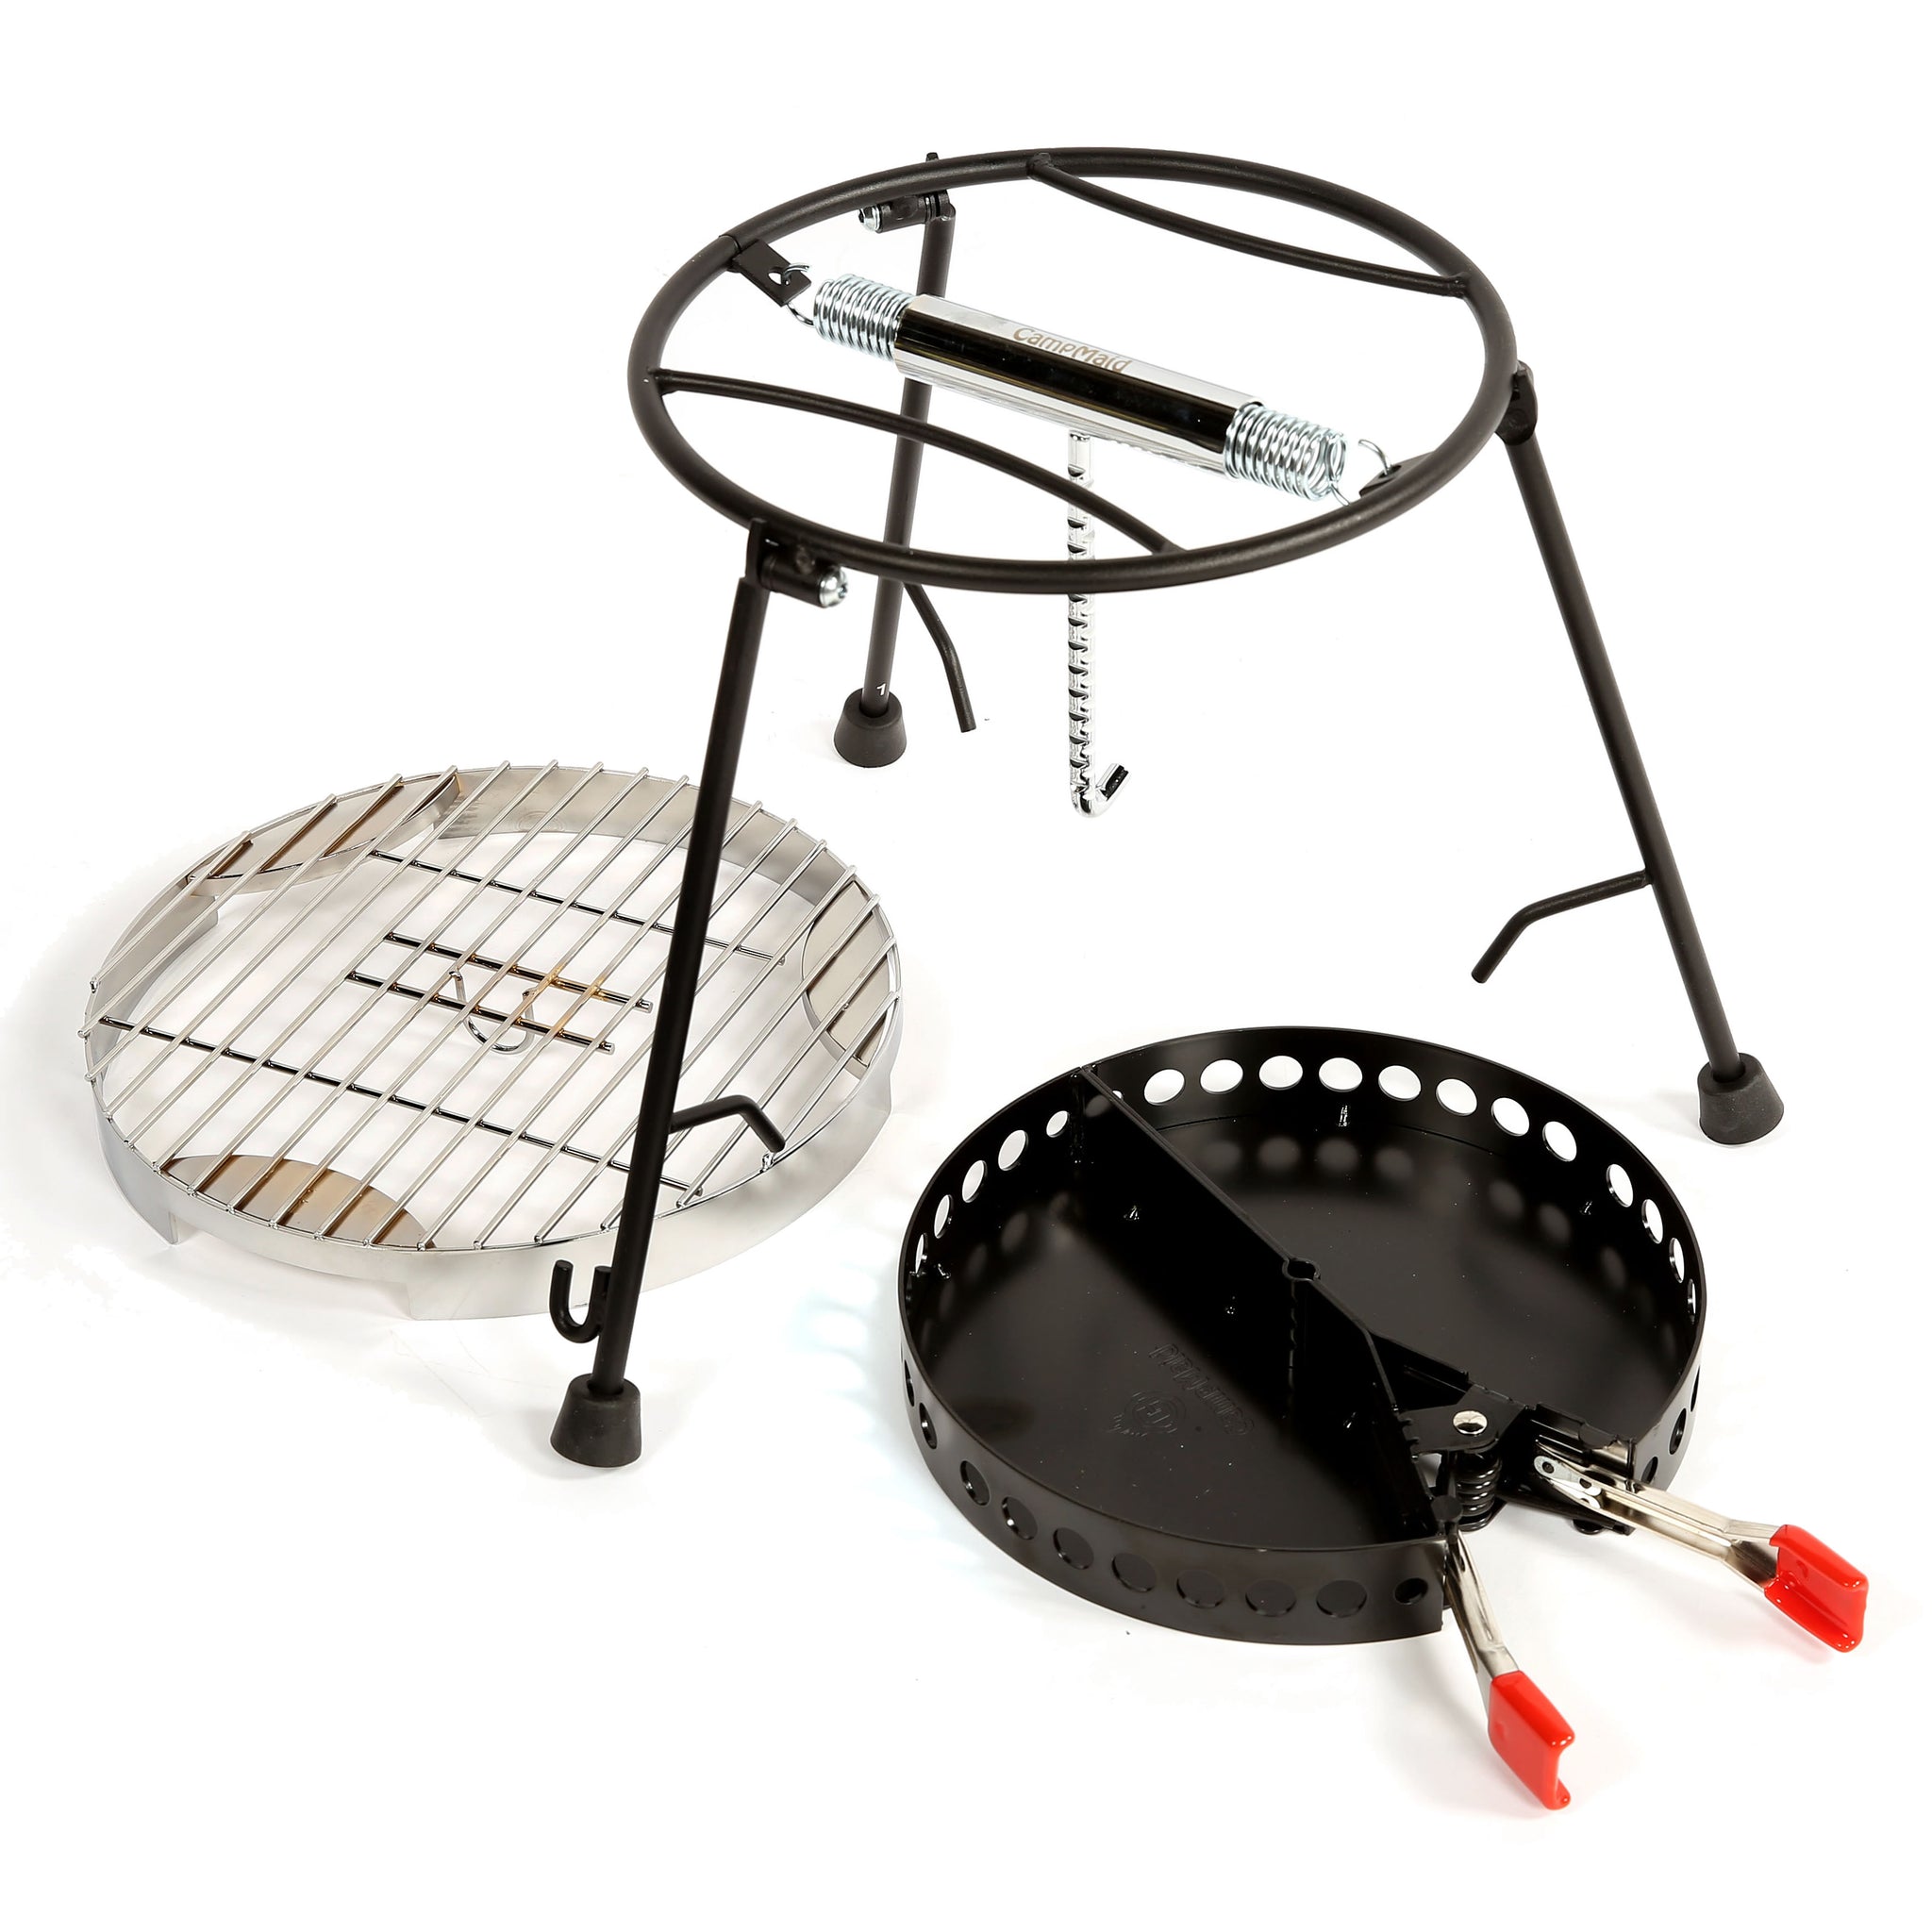 CampMaid RNAB08D5CFXP8 campmaid outdoor cooking set - dutch oven